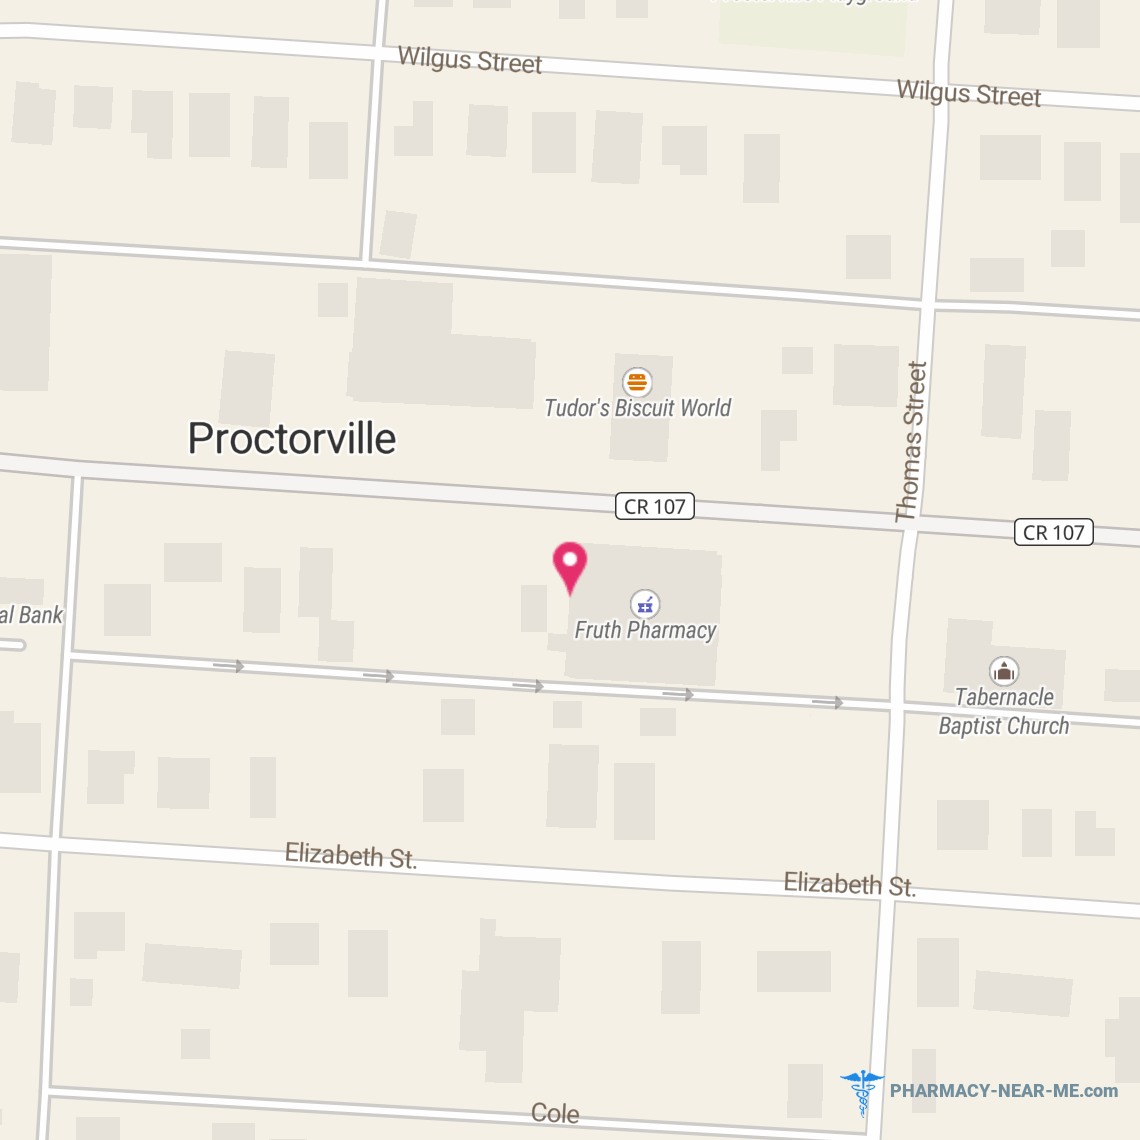 FRUTH PHARMACY 08 - Pharmacy Hours, Phone, Reviews & Information: 259 State St, Proctorville, OH 45669